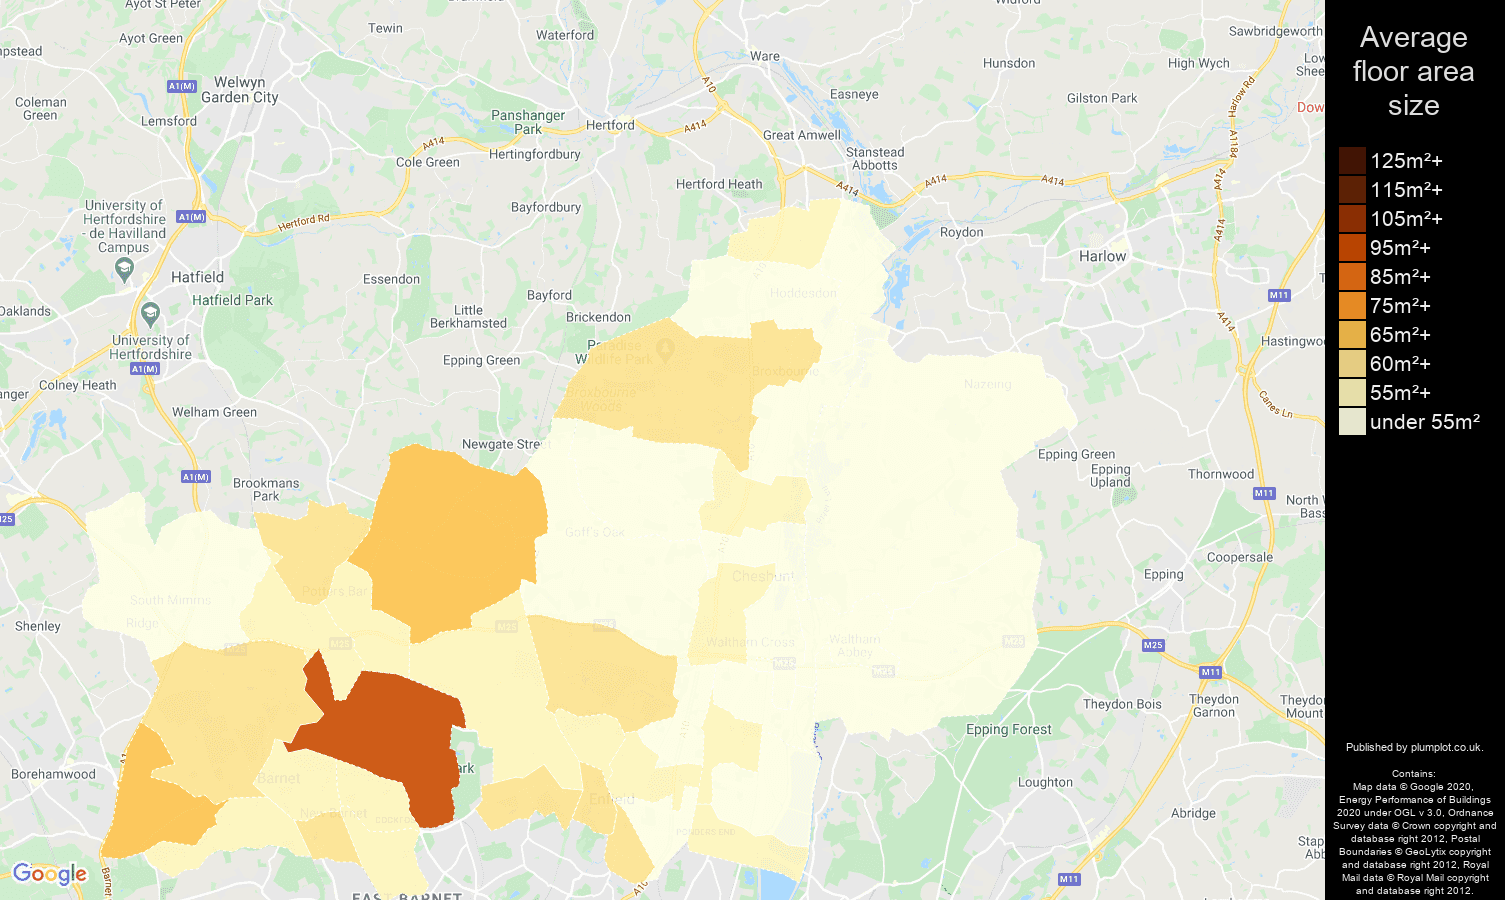 Enfield map of average floor area size of flats